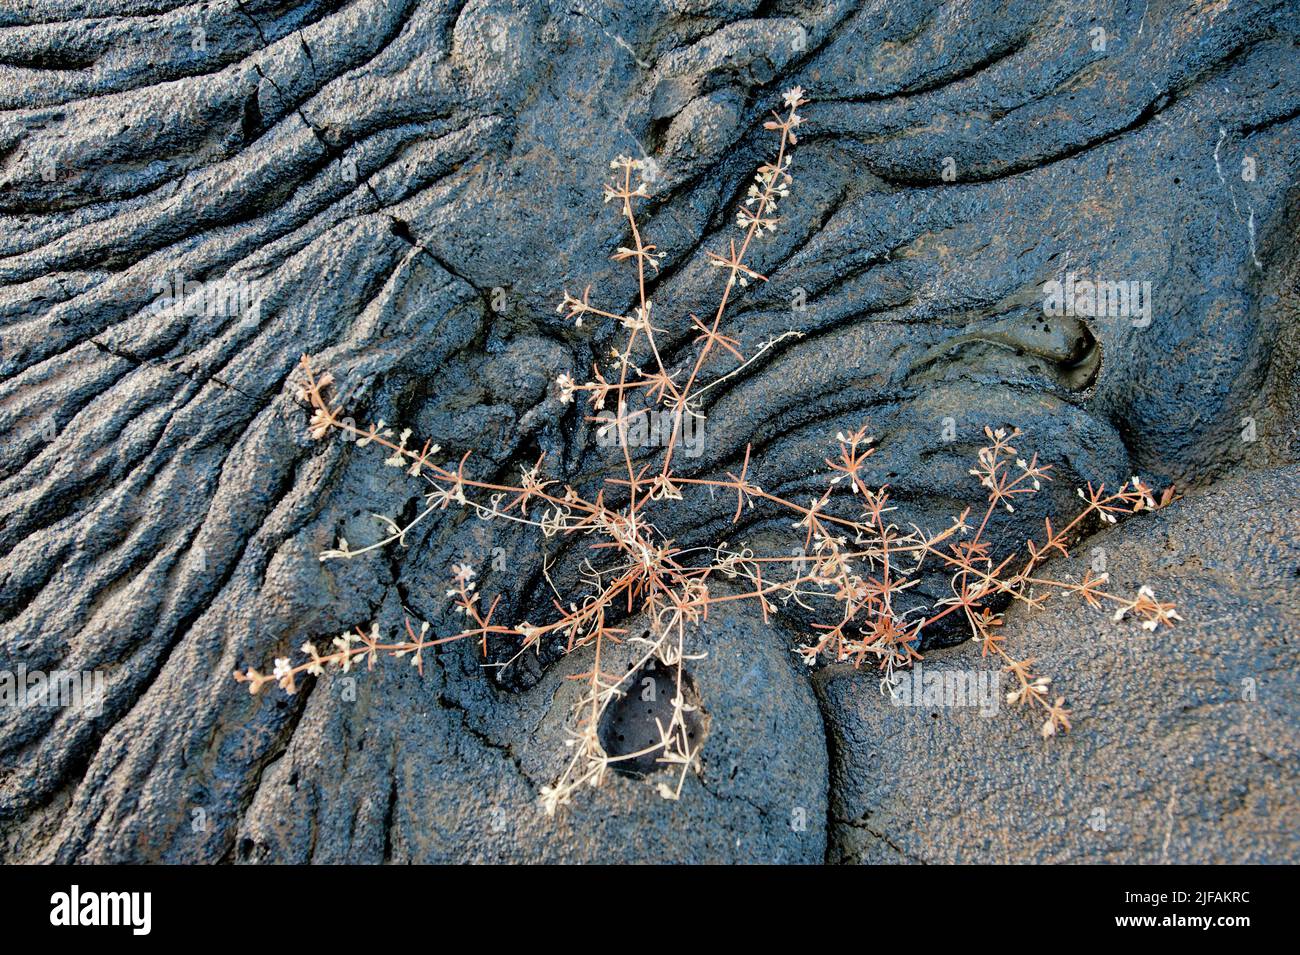 Mollugo flavescens, an endemic plant to the Galapagos, here growing in lava at Sullivan Bay, Santiago. Stock Photo